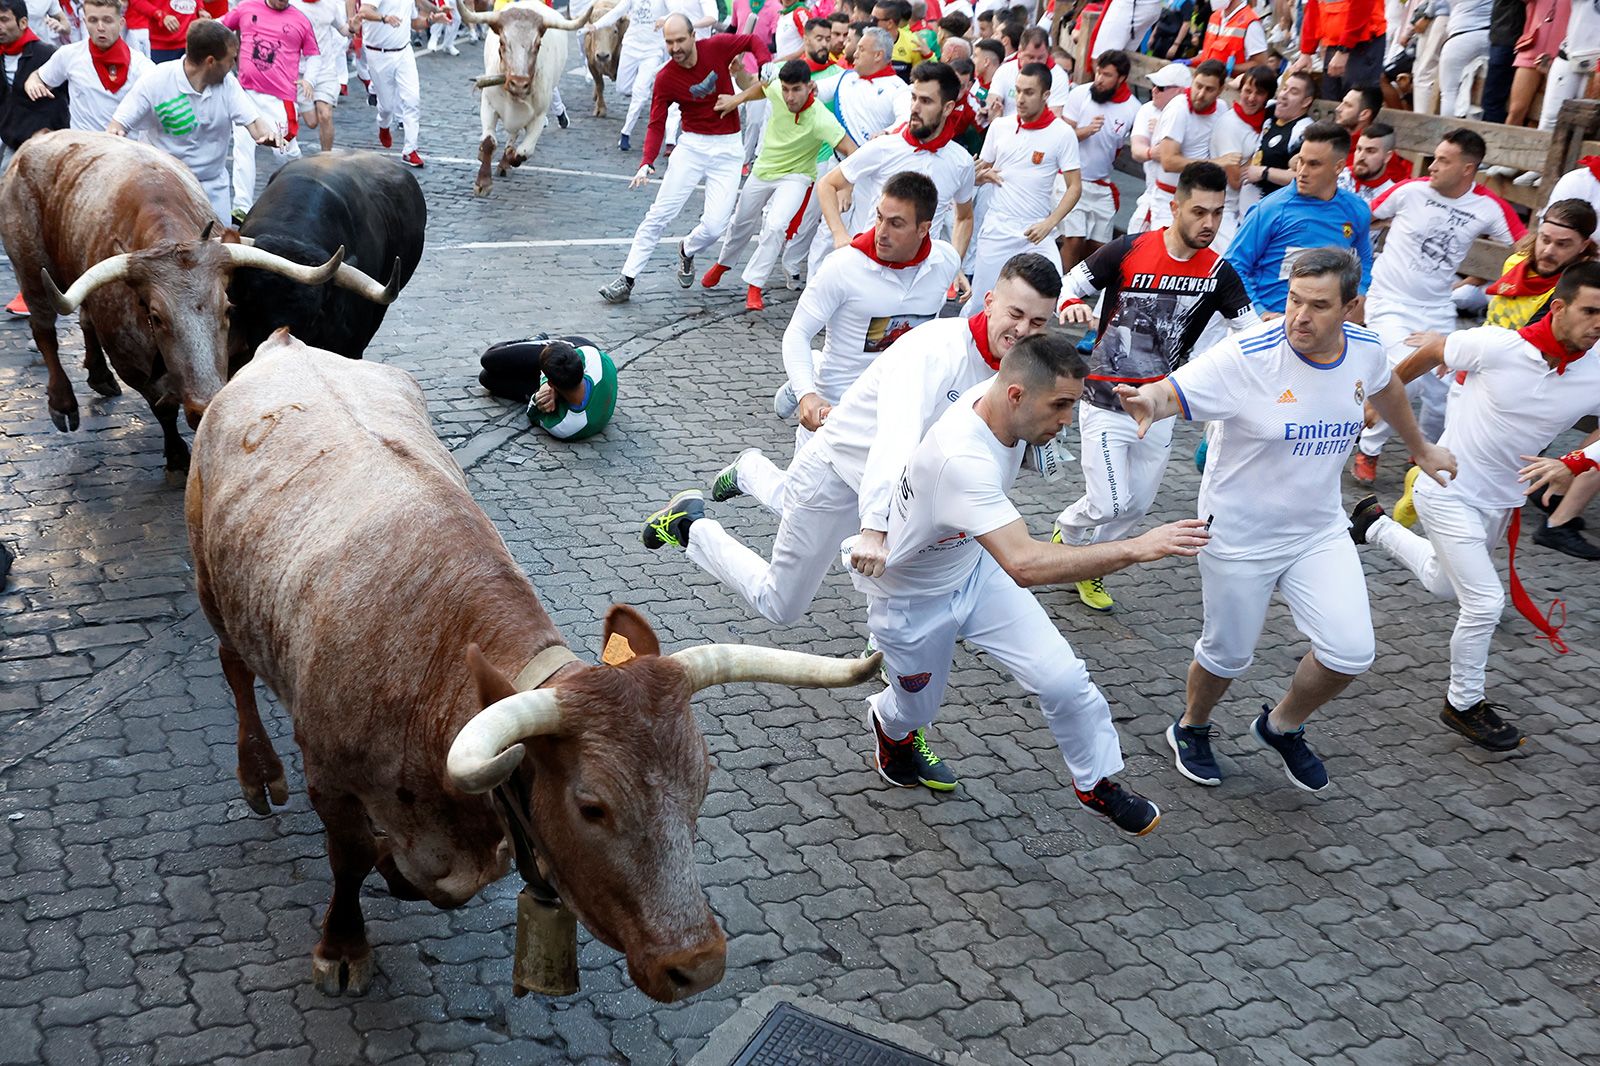 4 people gored in Spain's 5th Pamplona running of the bulls, News